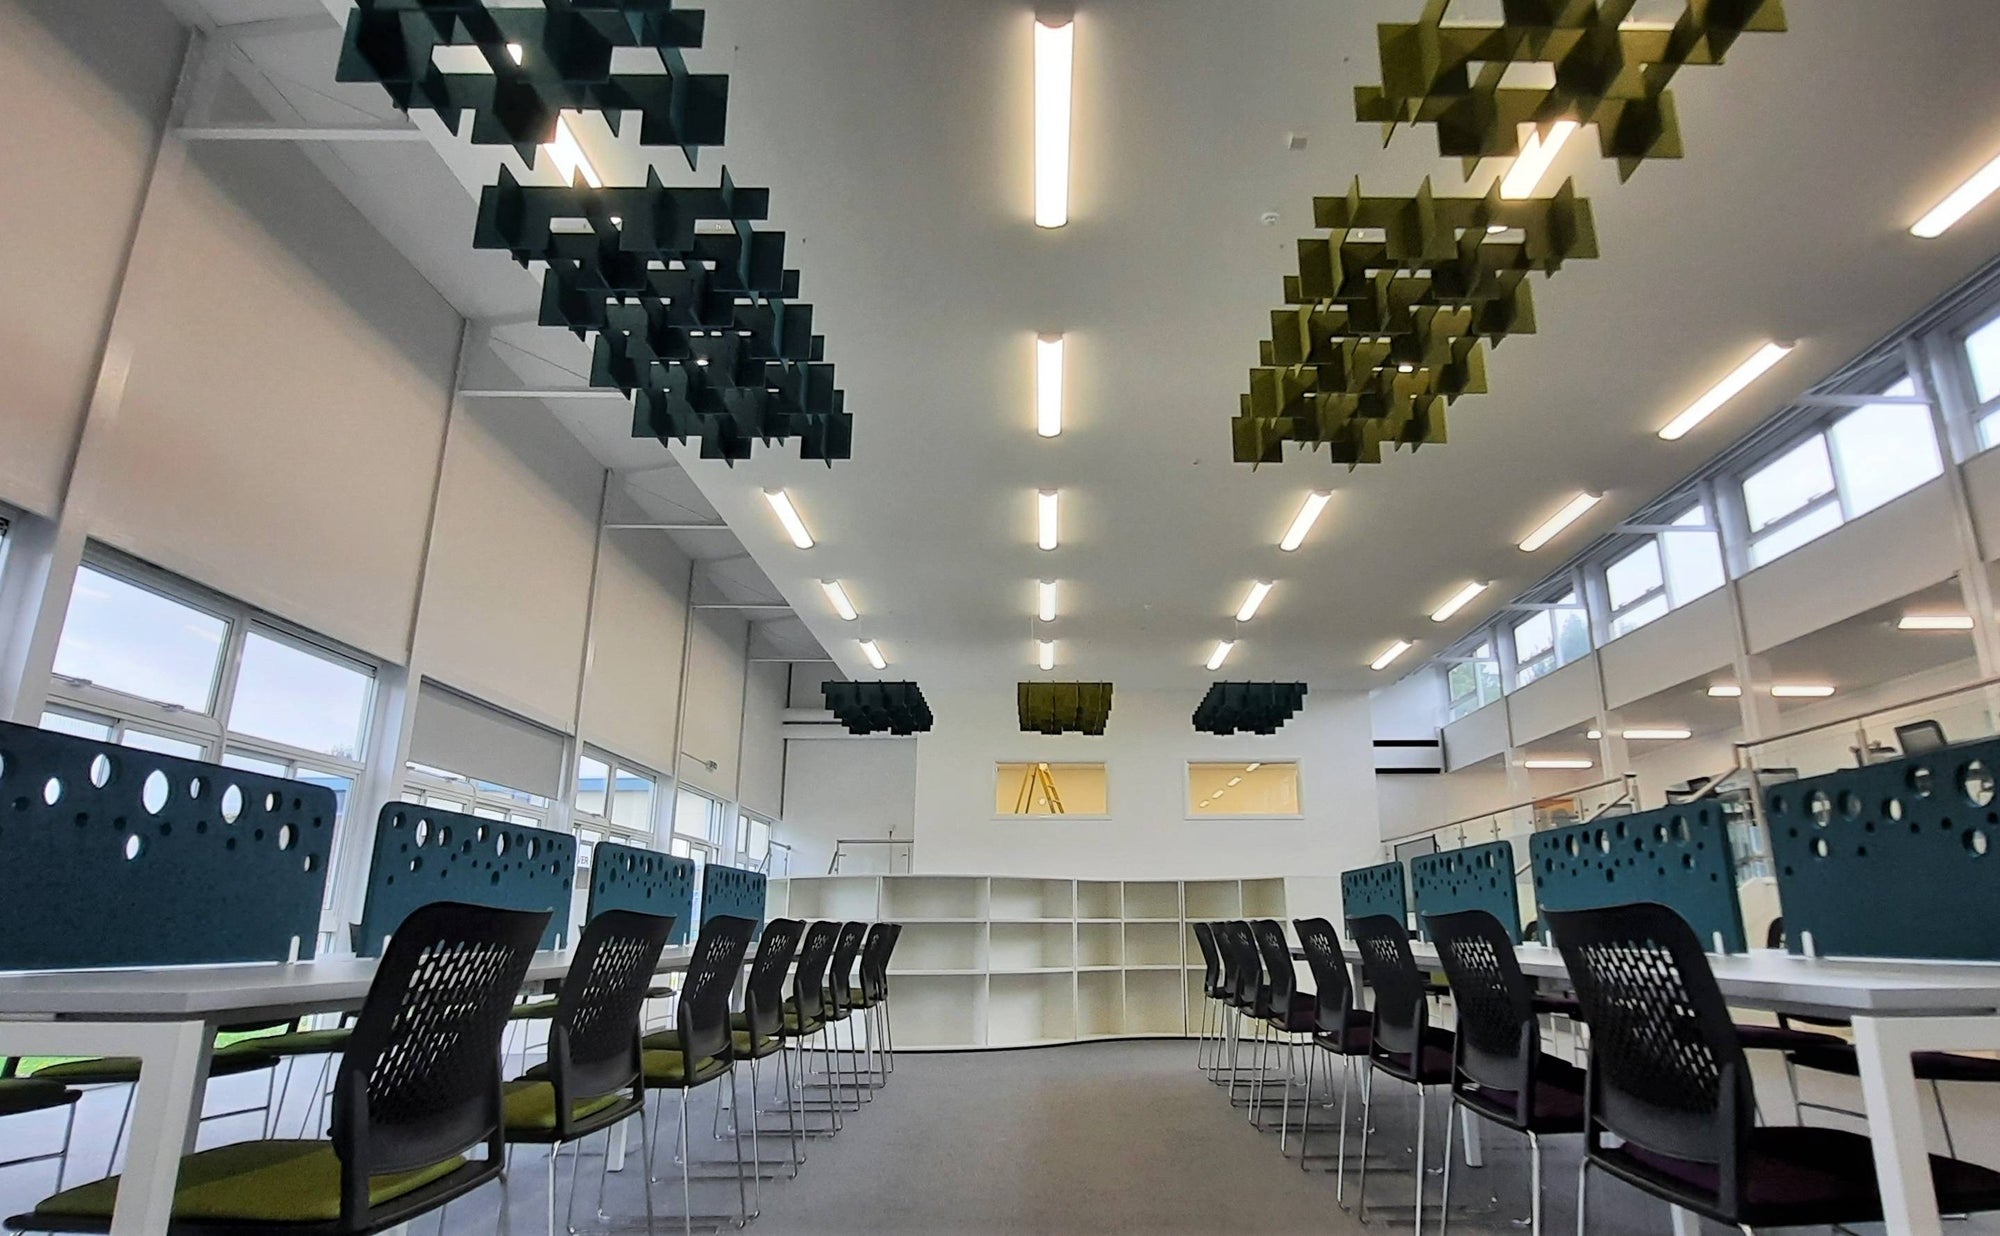 How to get the acoustics right in your school